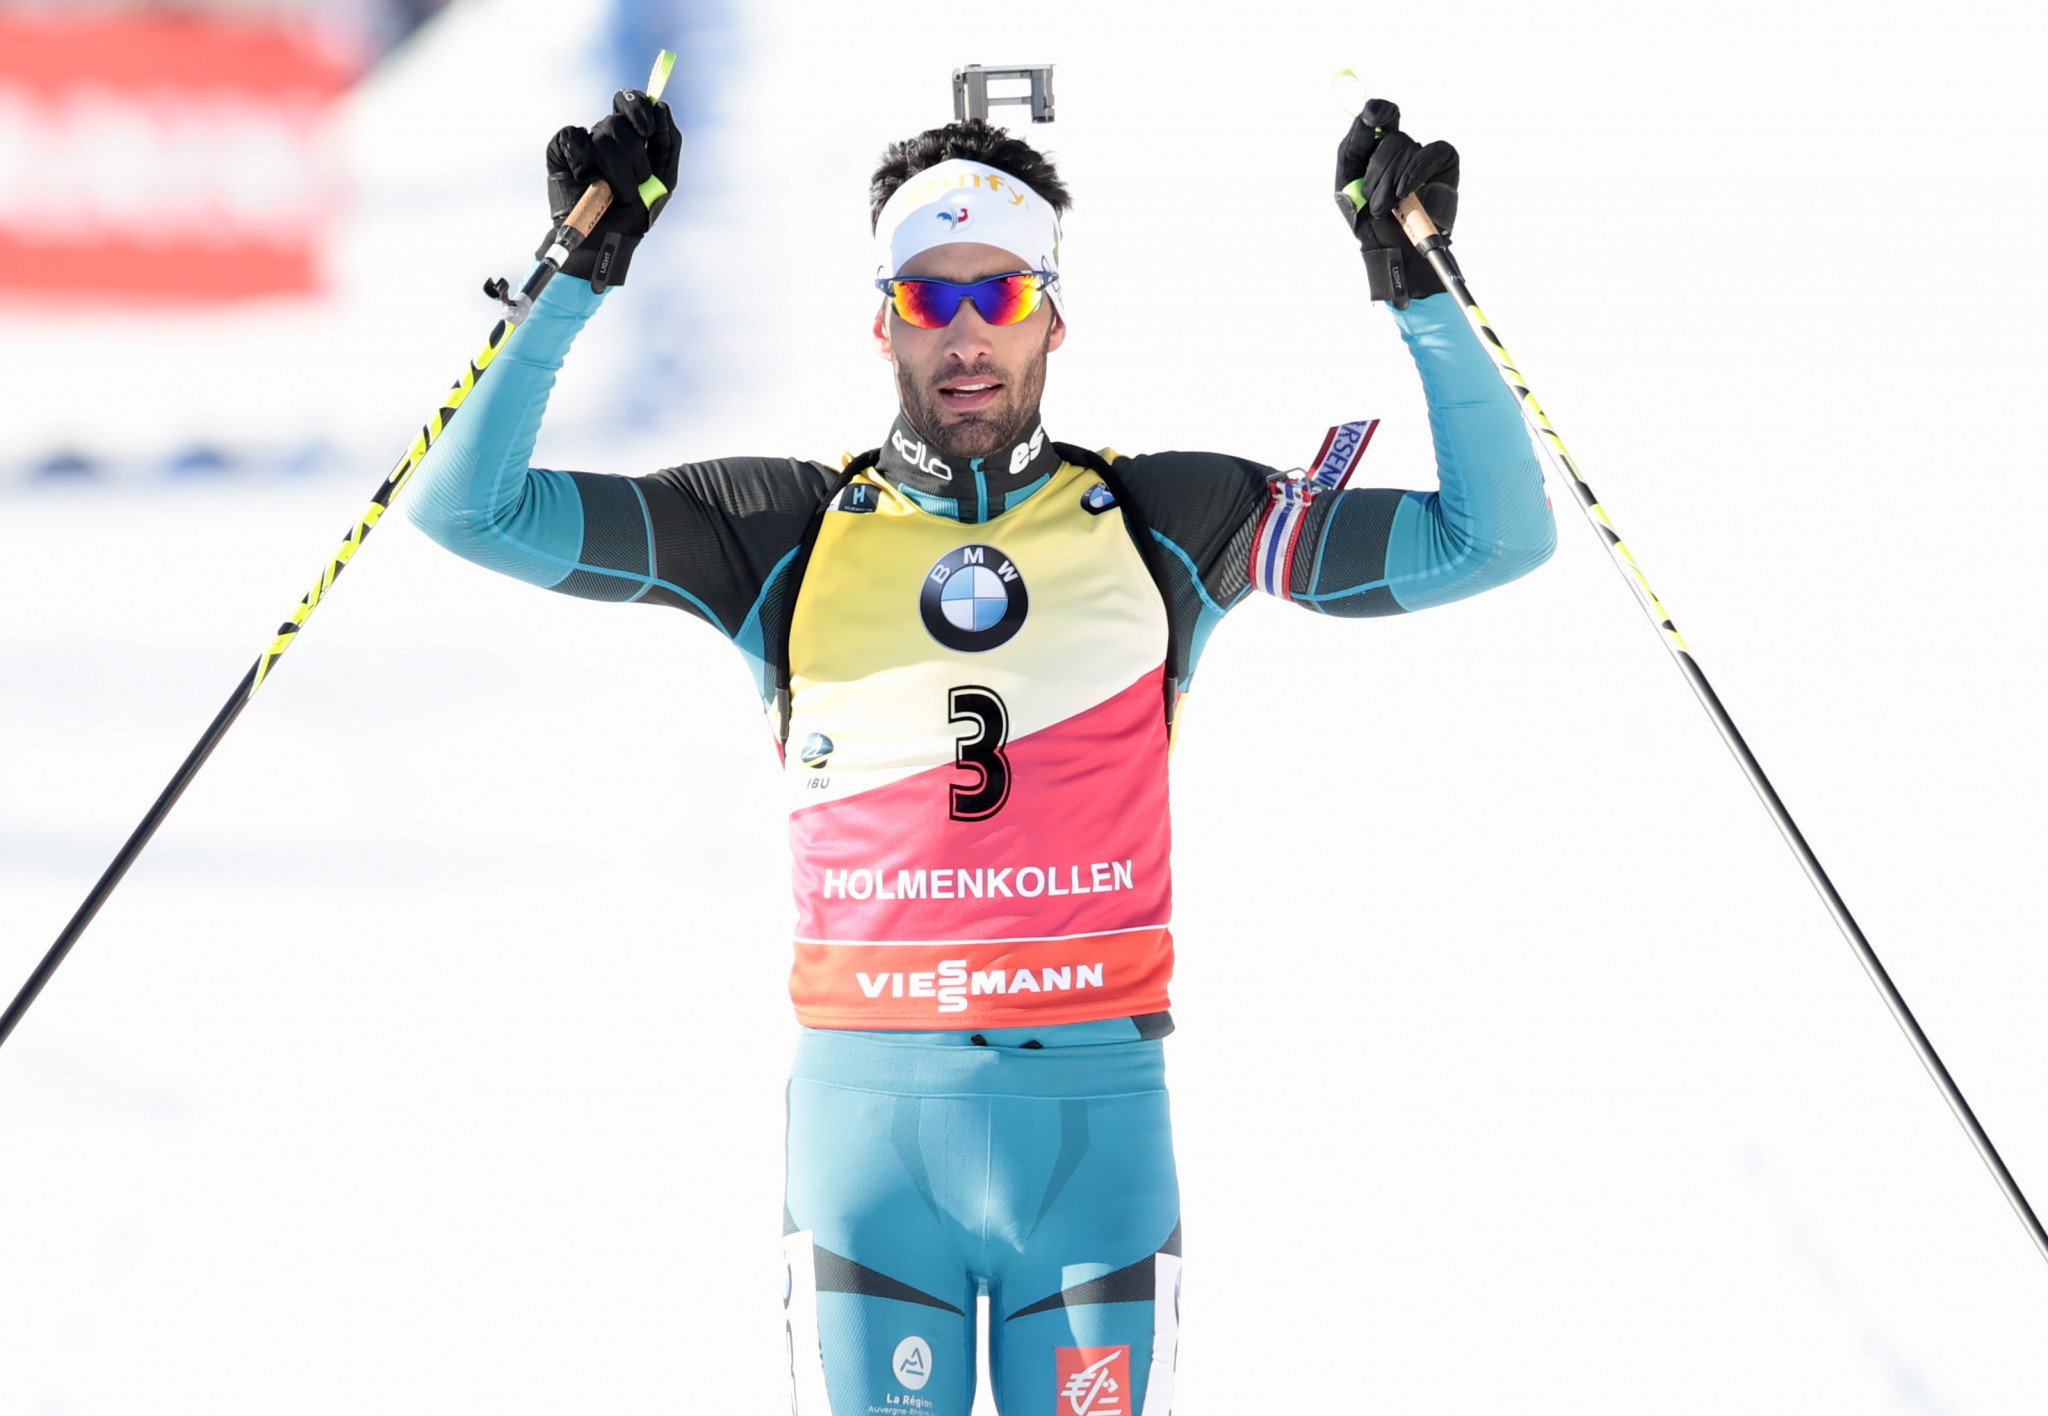 Martin Fourcade, pictured winning in Holmenkollen last week, won the World Cup finals today in Russia ©Getty Images